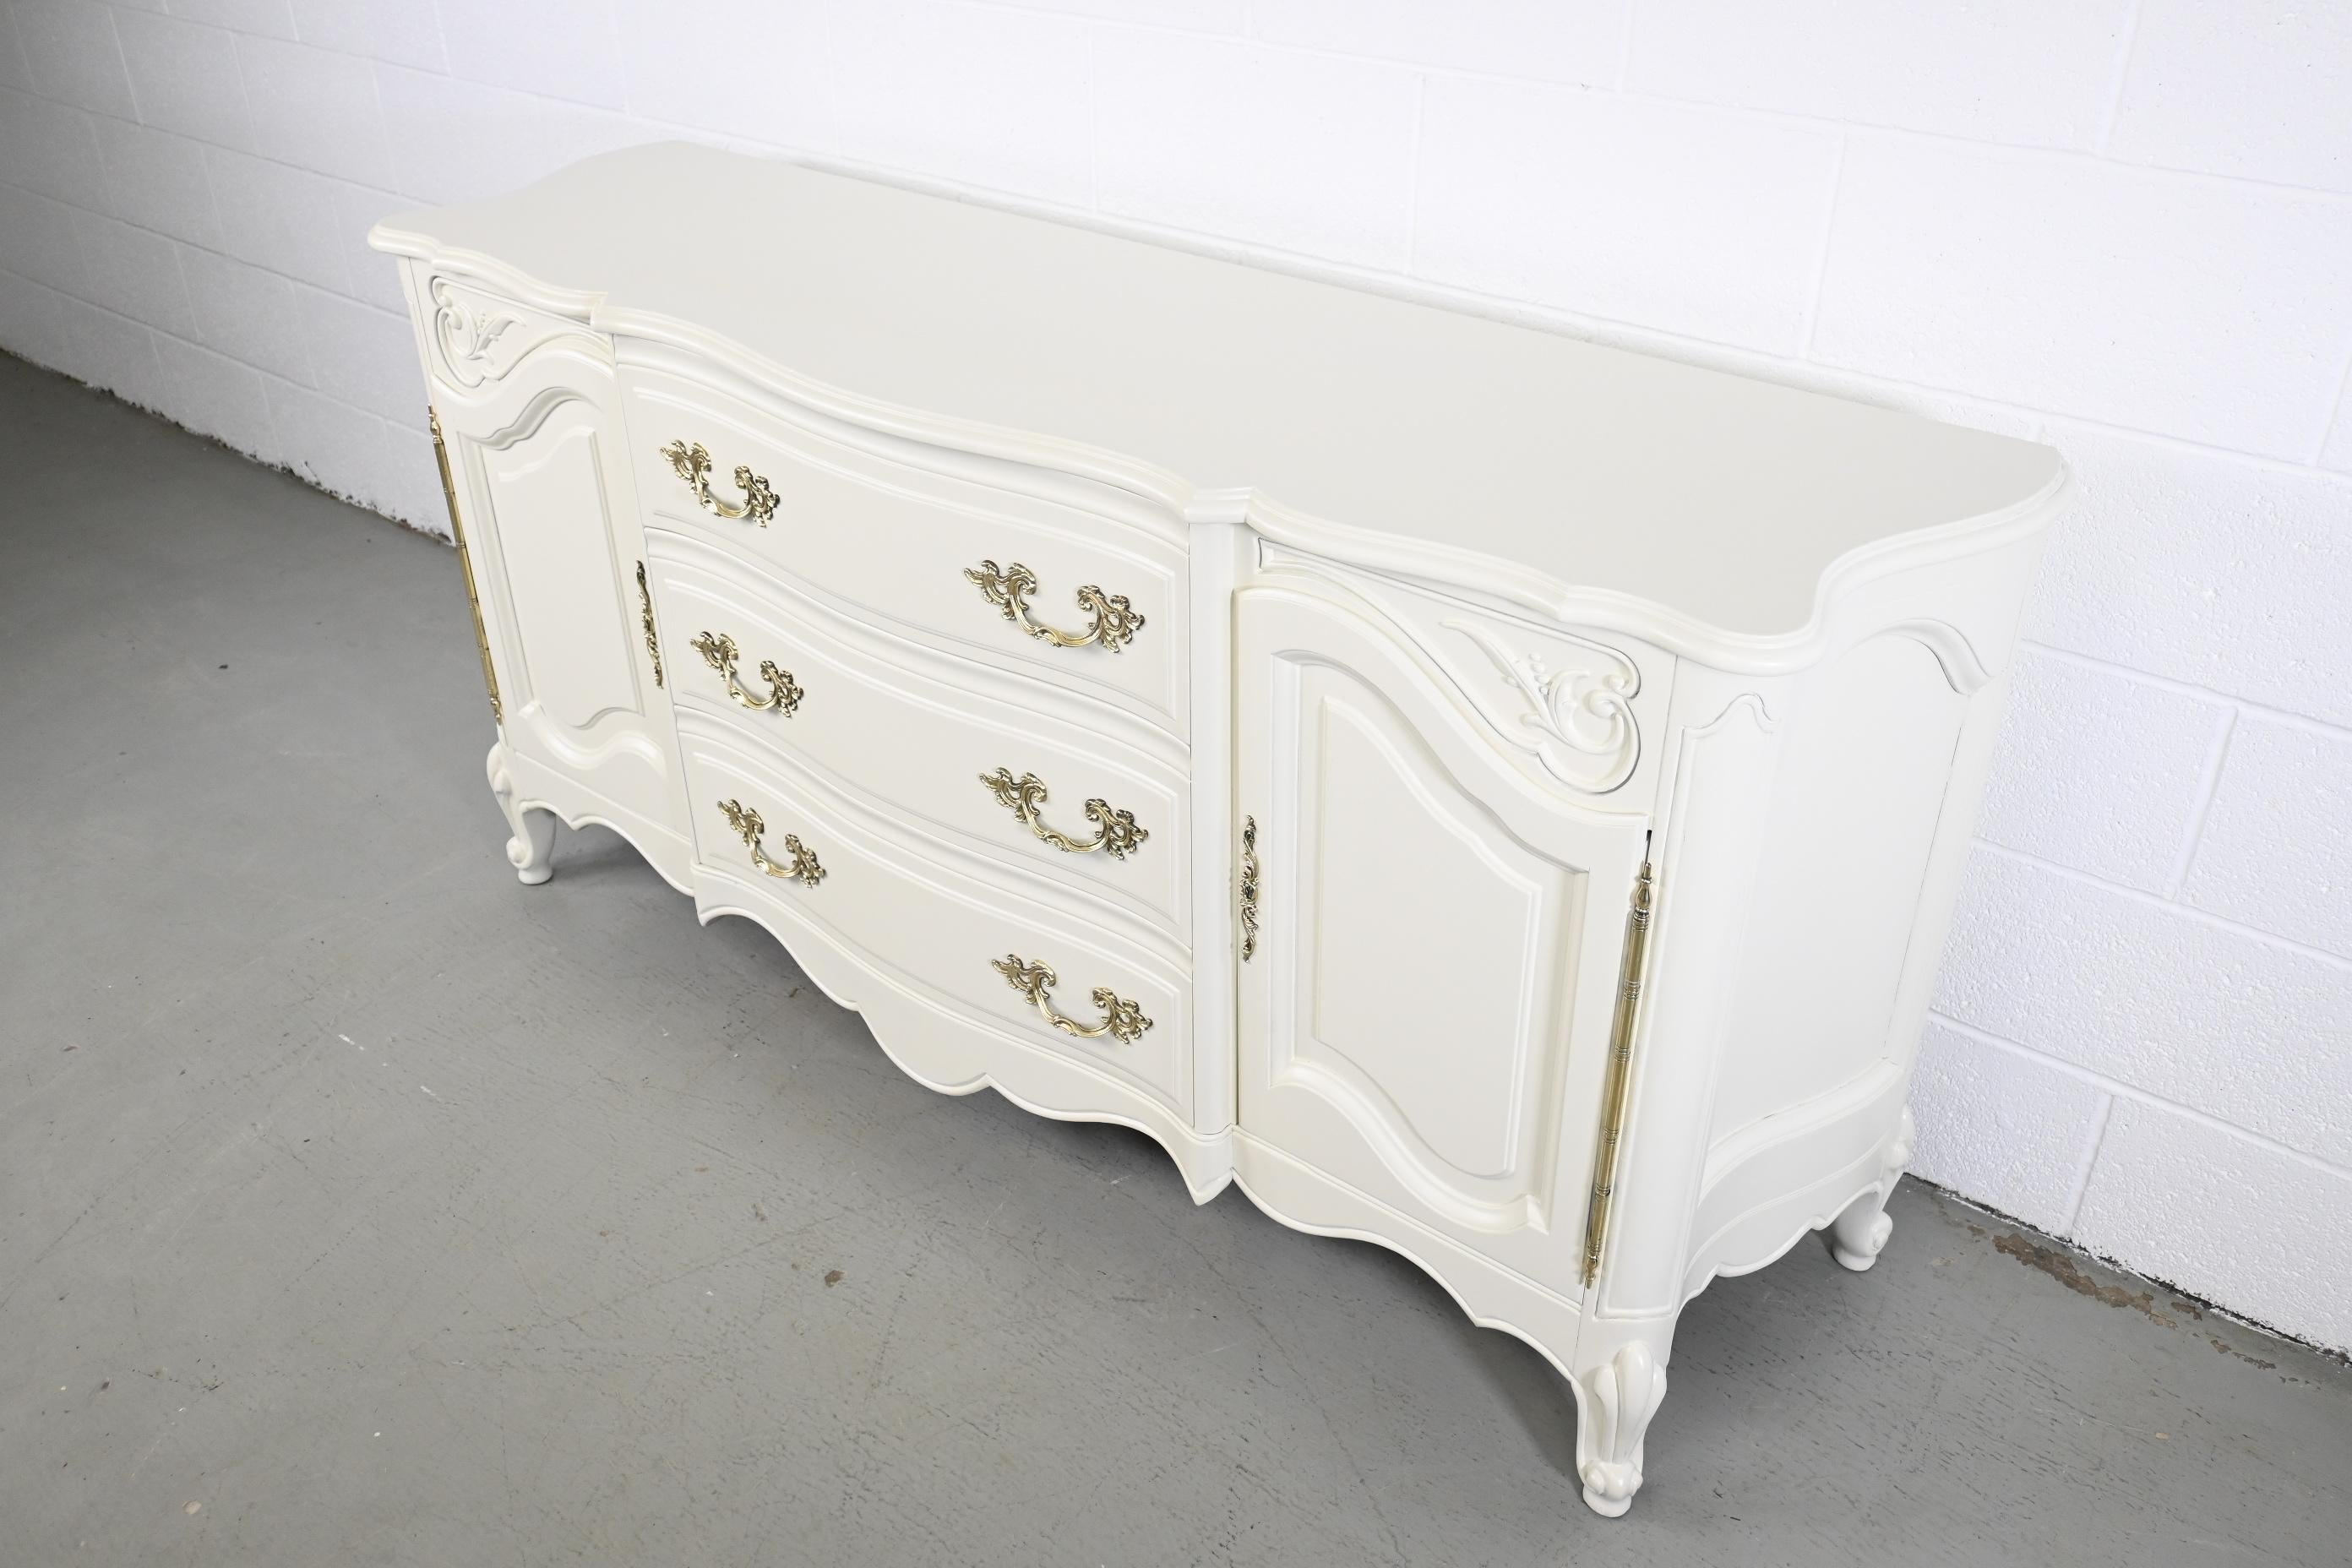 Karges Furniture Louis XV French Provincial Credenza or Sideboard In Excellent Condition For Sale In Morgan, UT